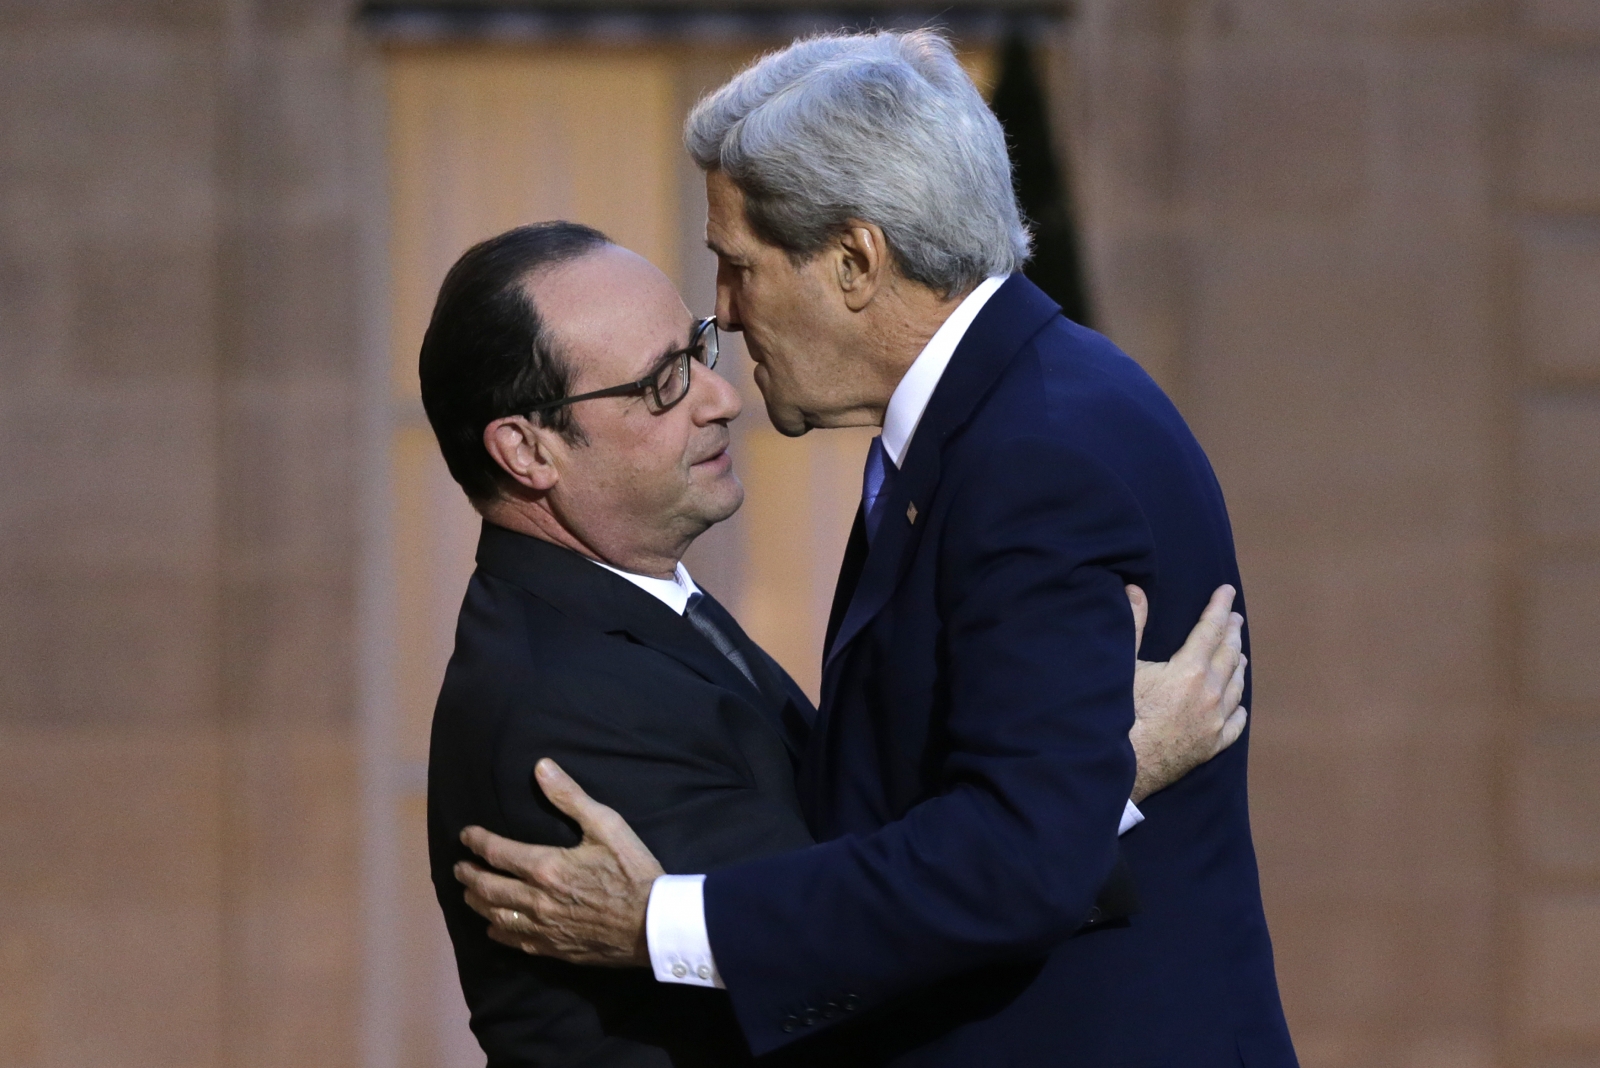 Charlie Hebdo: Kerry in Paris apologises for failed appearance at Unity March President Hollande